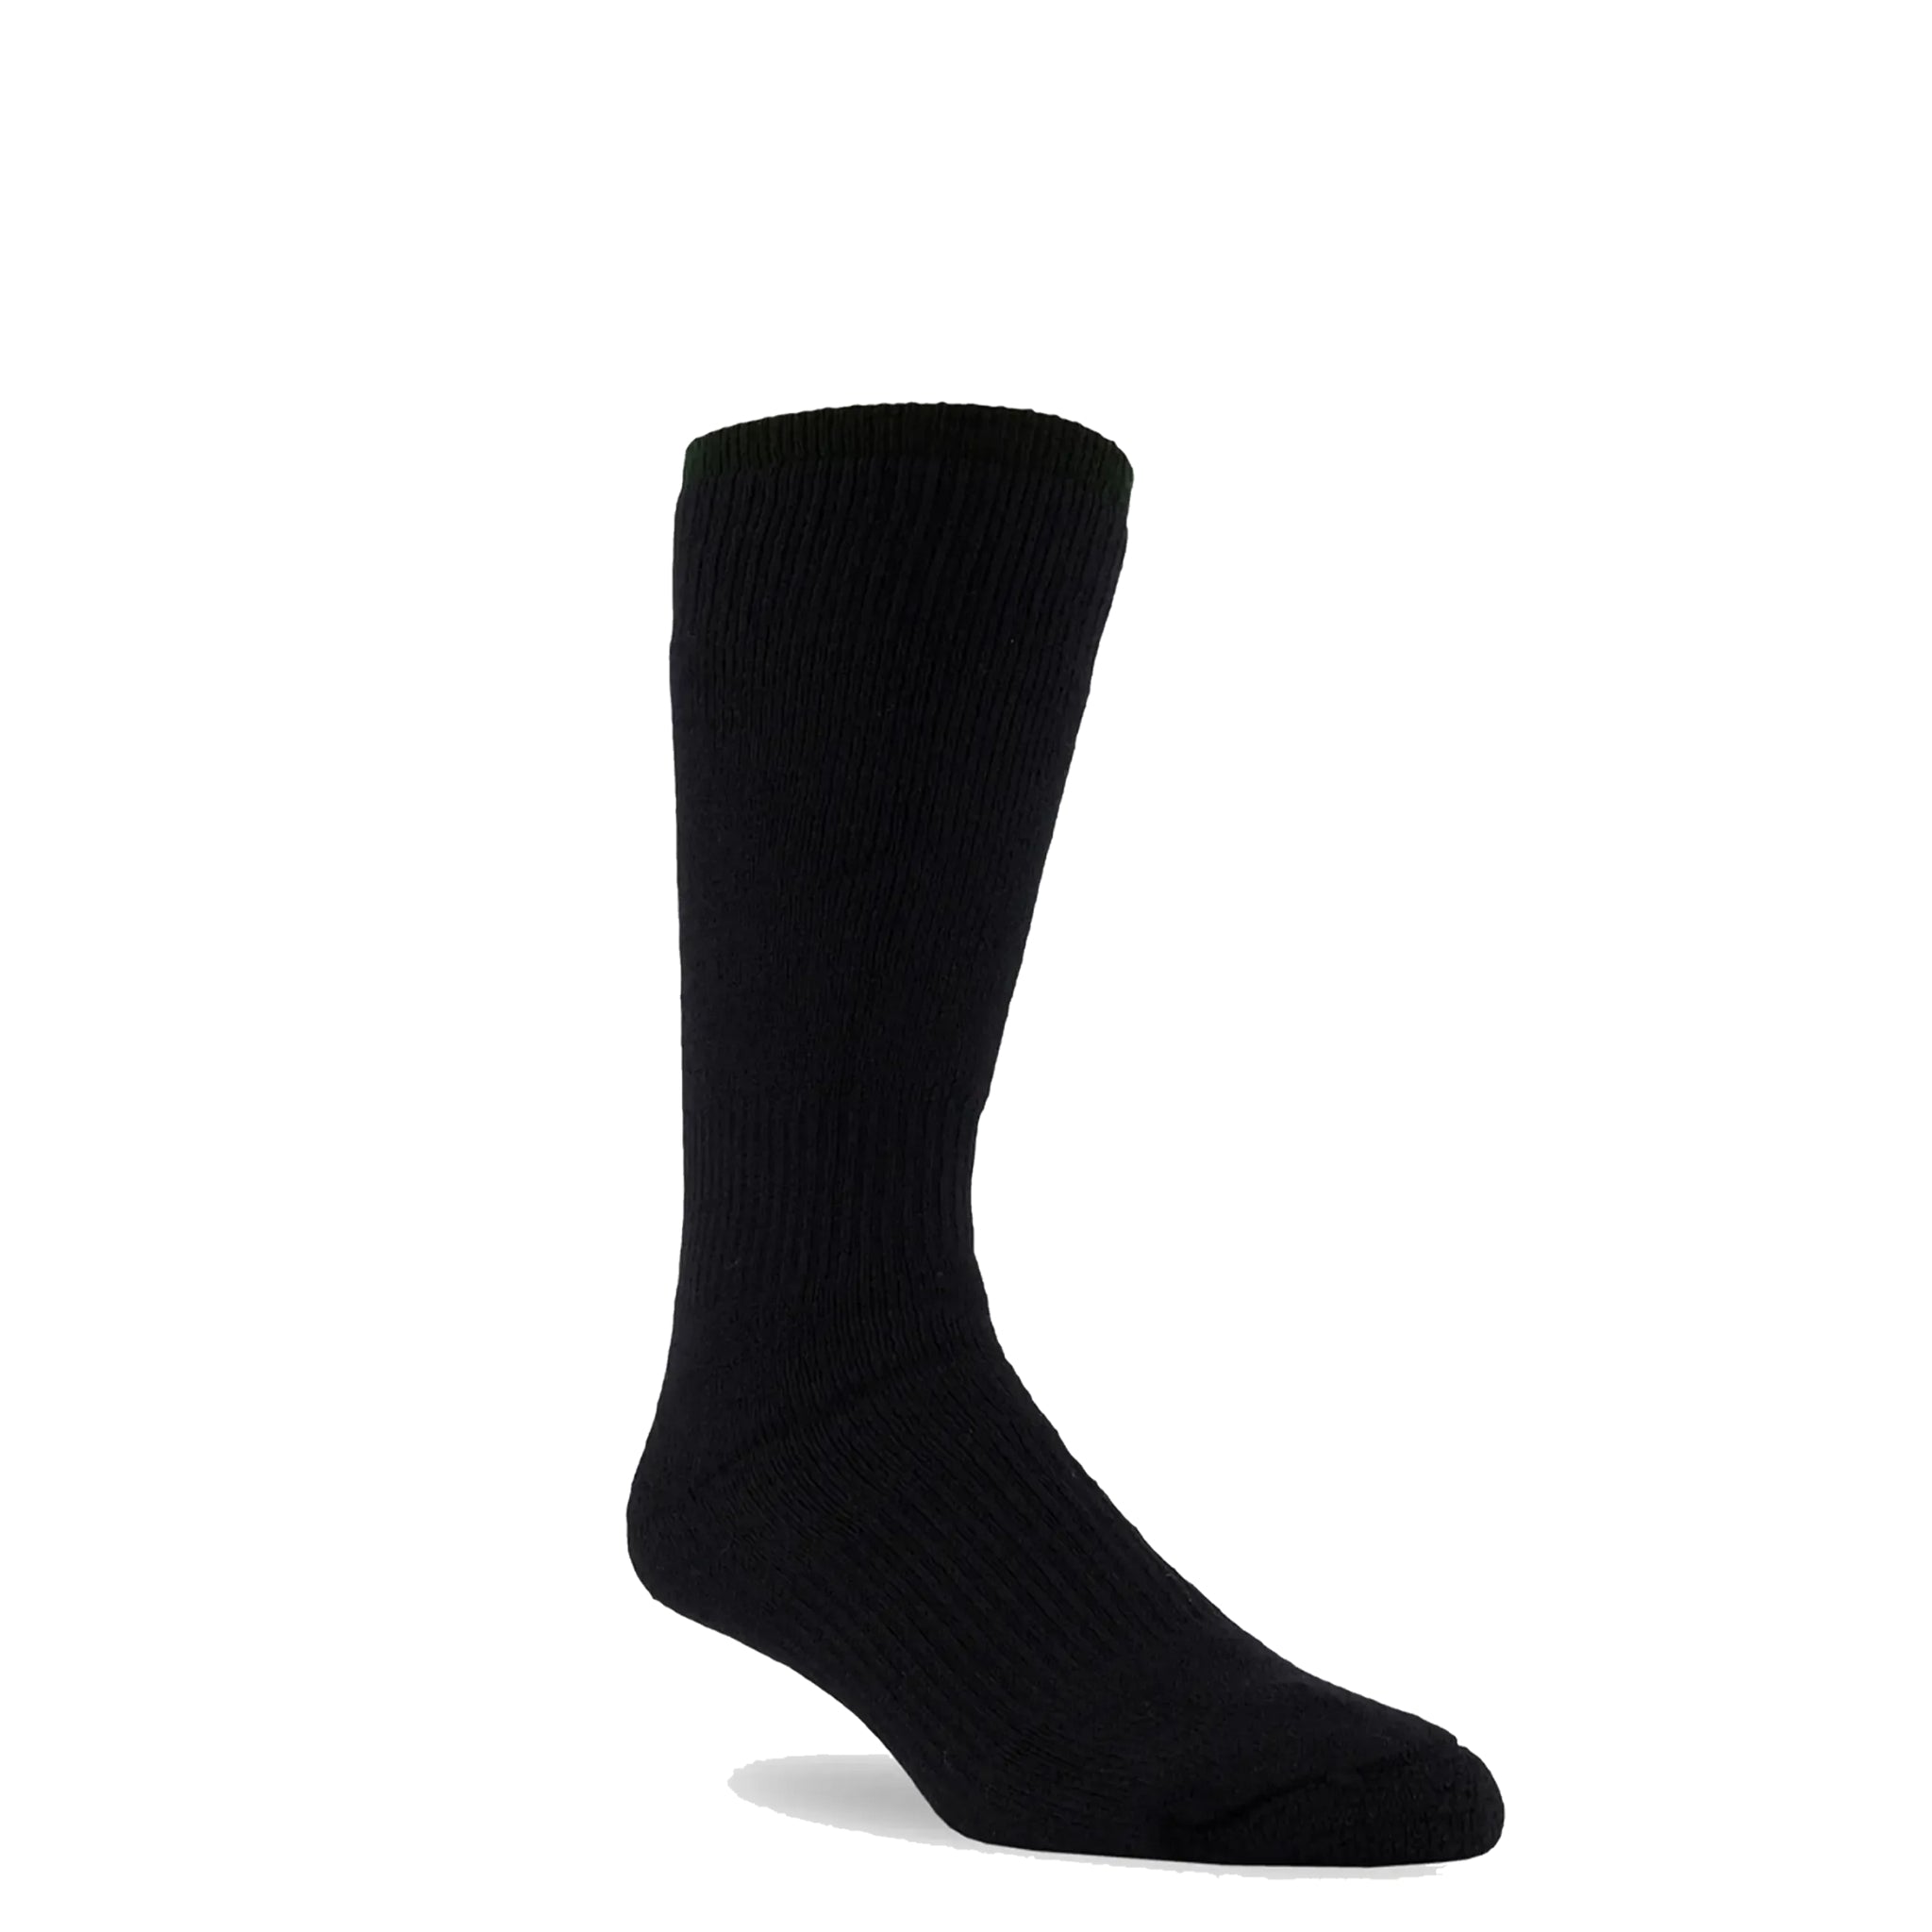 one black heavyweight sock standing on its own on a white background